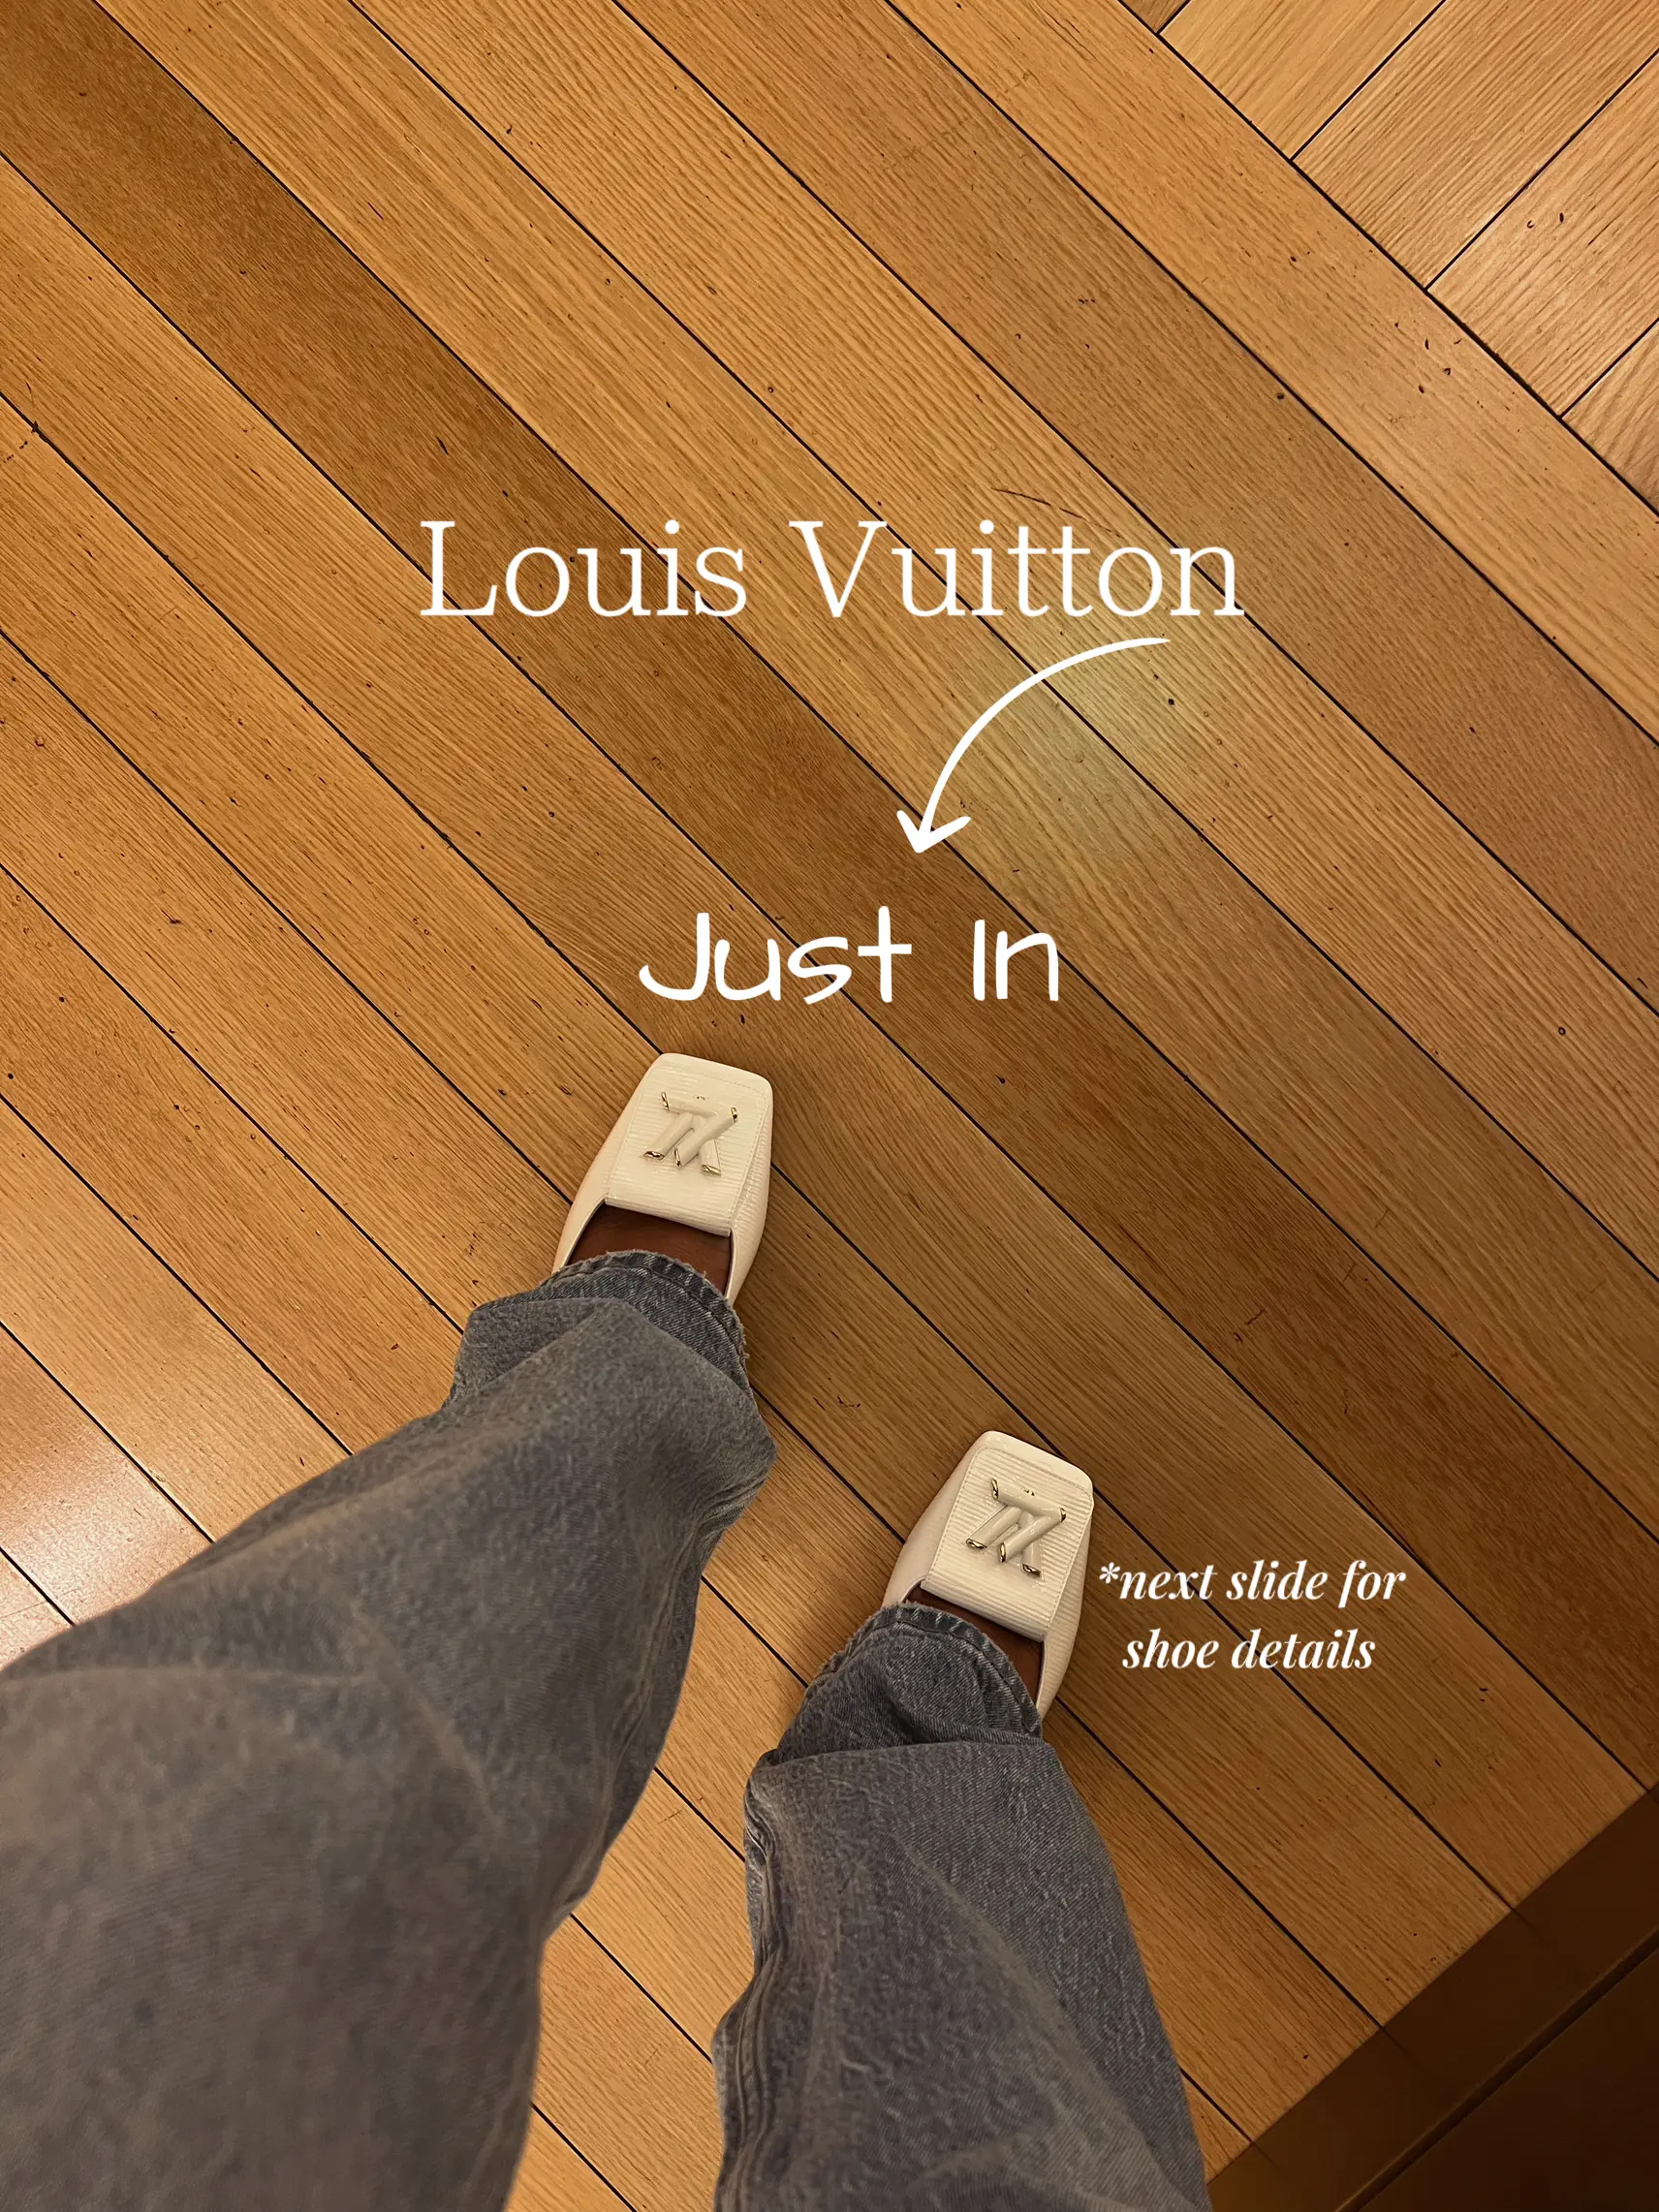 New Louis Vuitton Slingback Heels, Gallery posted by Shay Moné